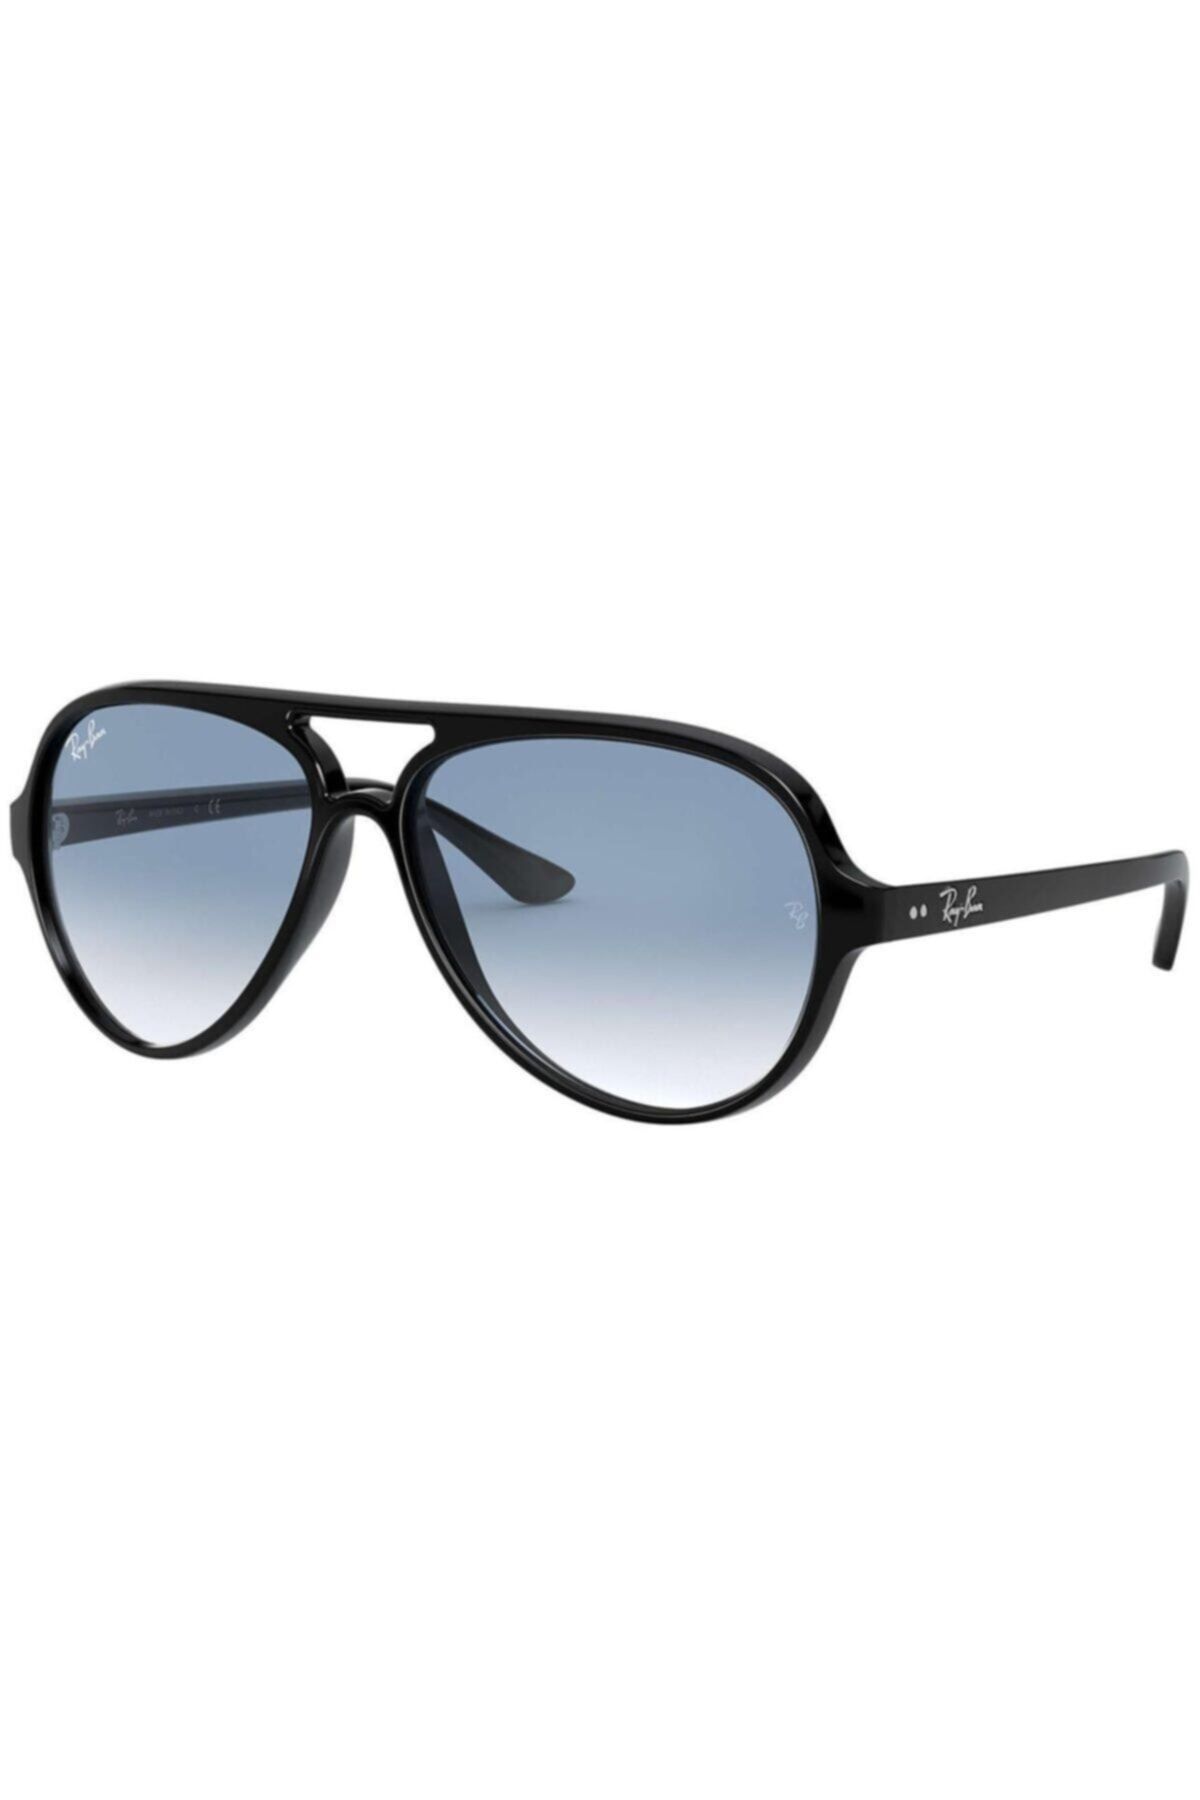 Details more than 161 ray ban 4125 sunglasses best